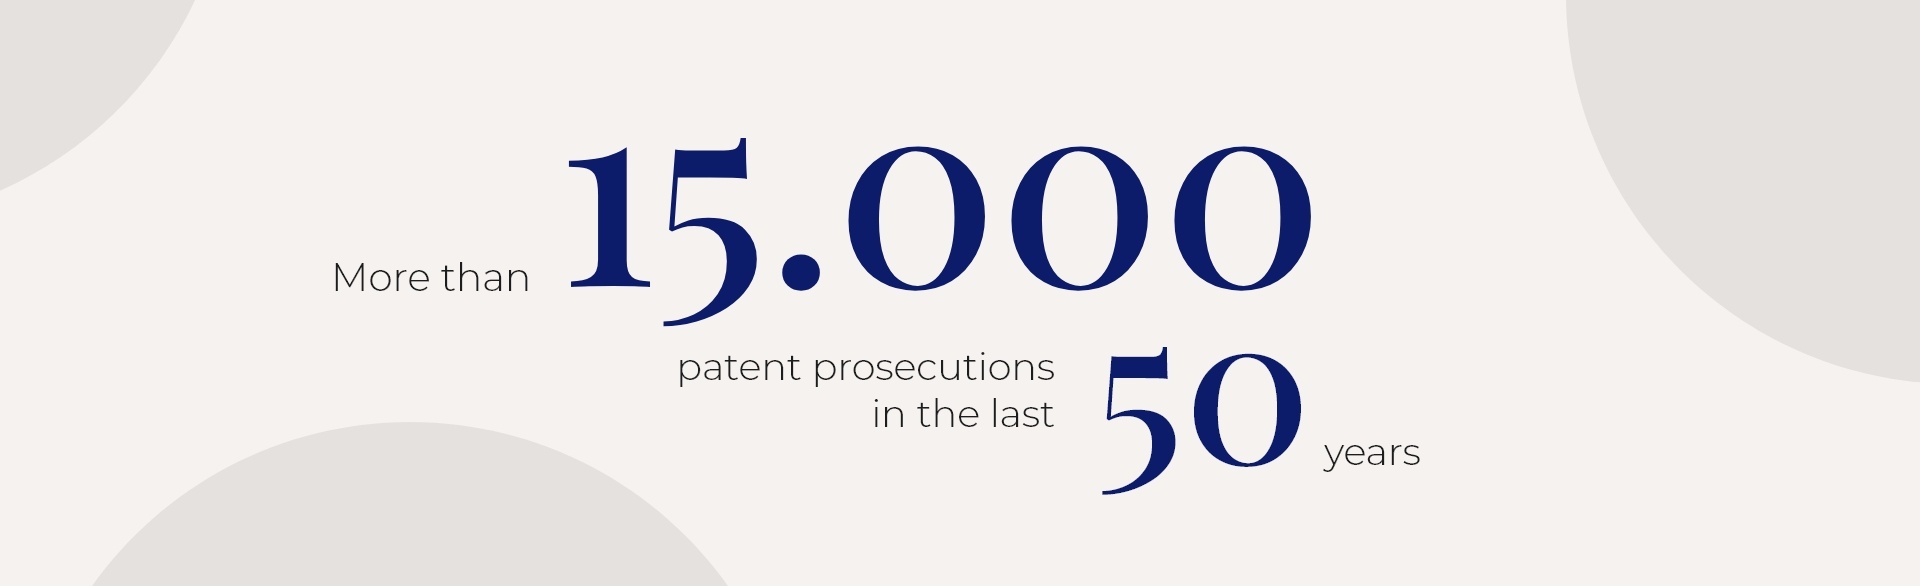 More than 15000 patent prosecutions in the last 50 years